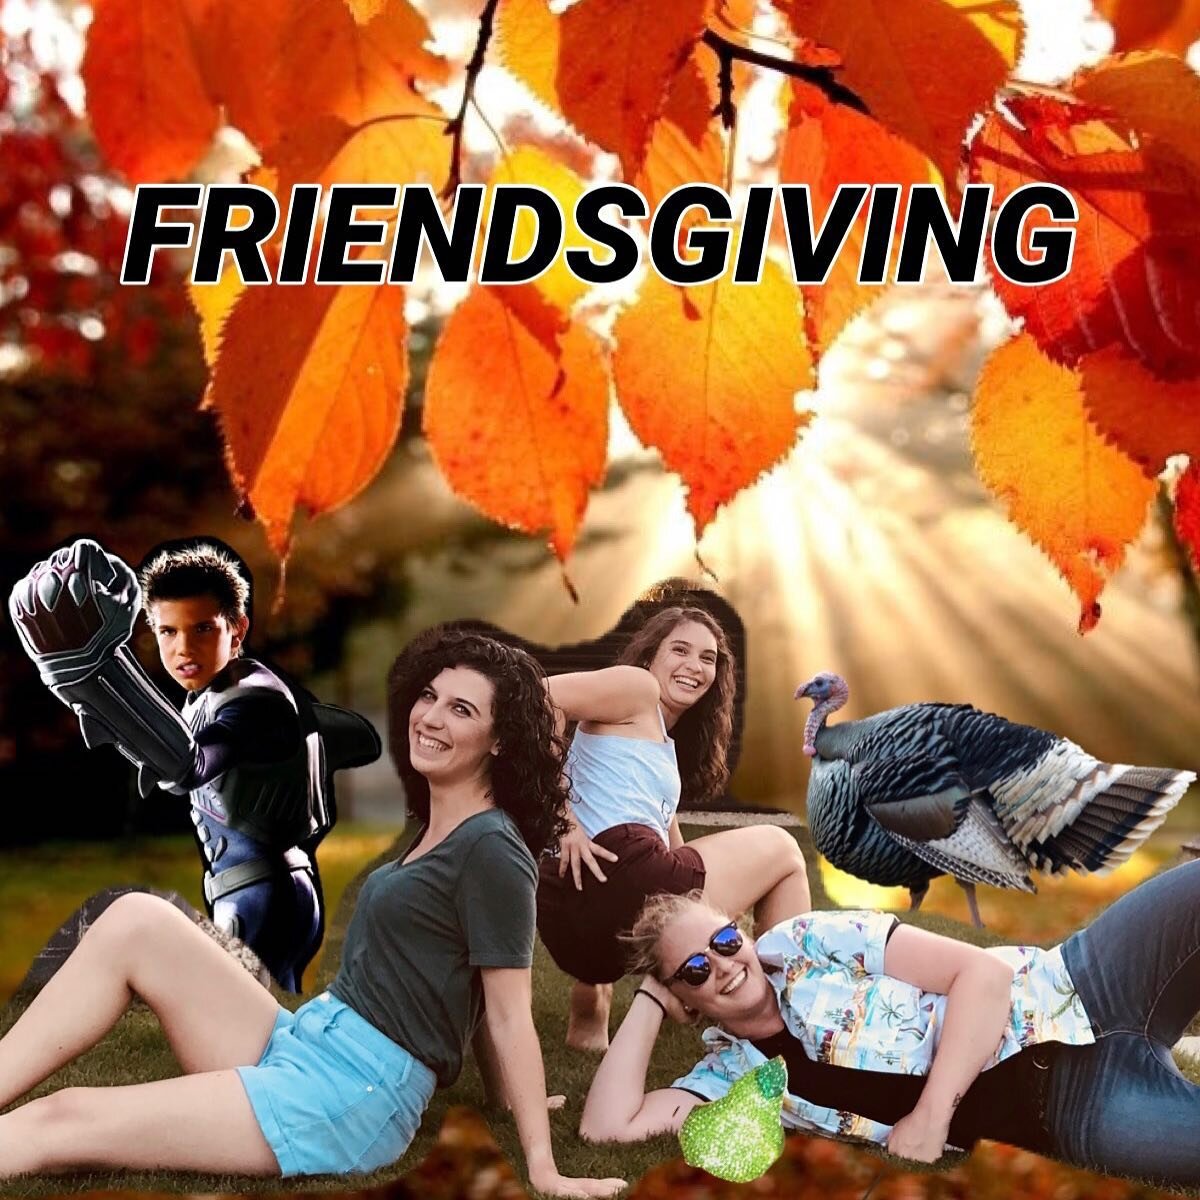 Ep 157 Friendsgiving
This year the DM wanted to give us a chance to get together as friends and share what we are all thankful for (as long as what we are thankful for is what the DM wants us to be thankful for). So grab all your best buds and join t